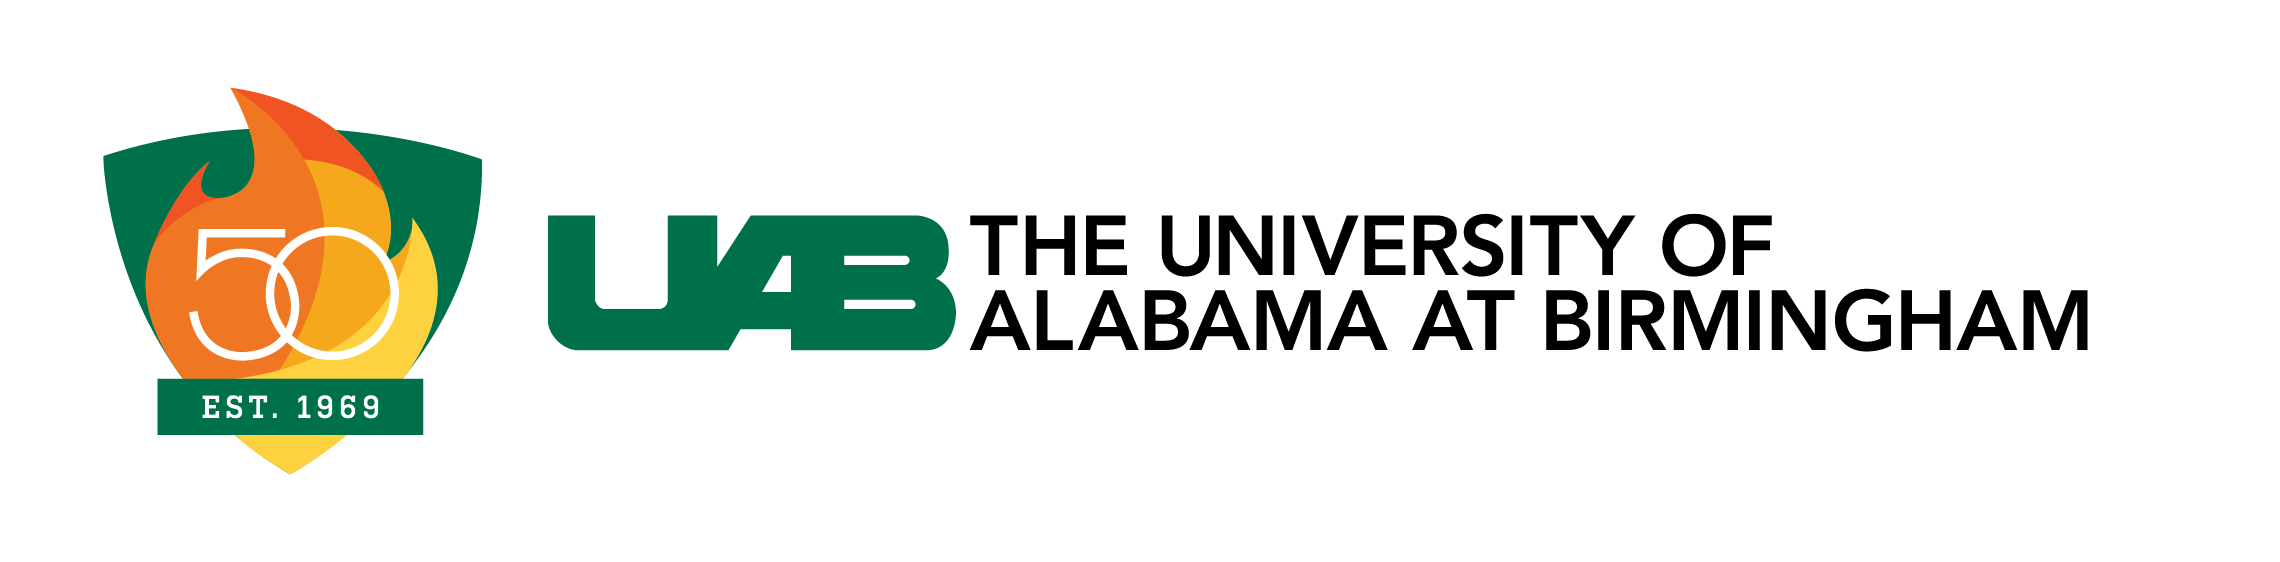 UAB 50th Logo - Shield Only - Color with White Outline